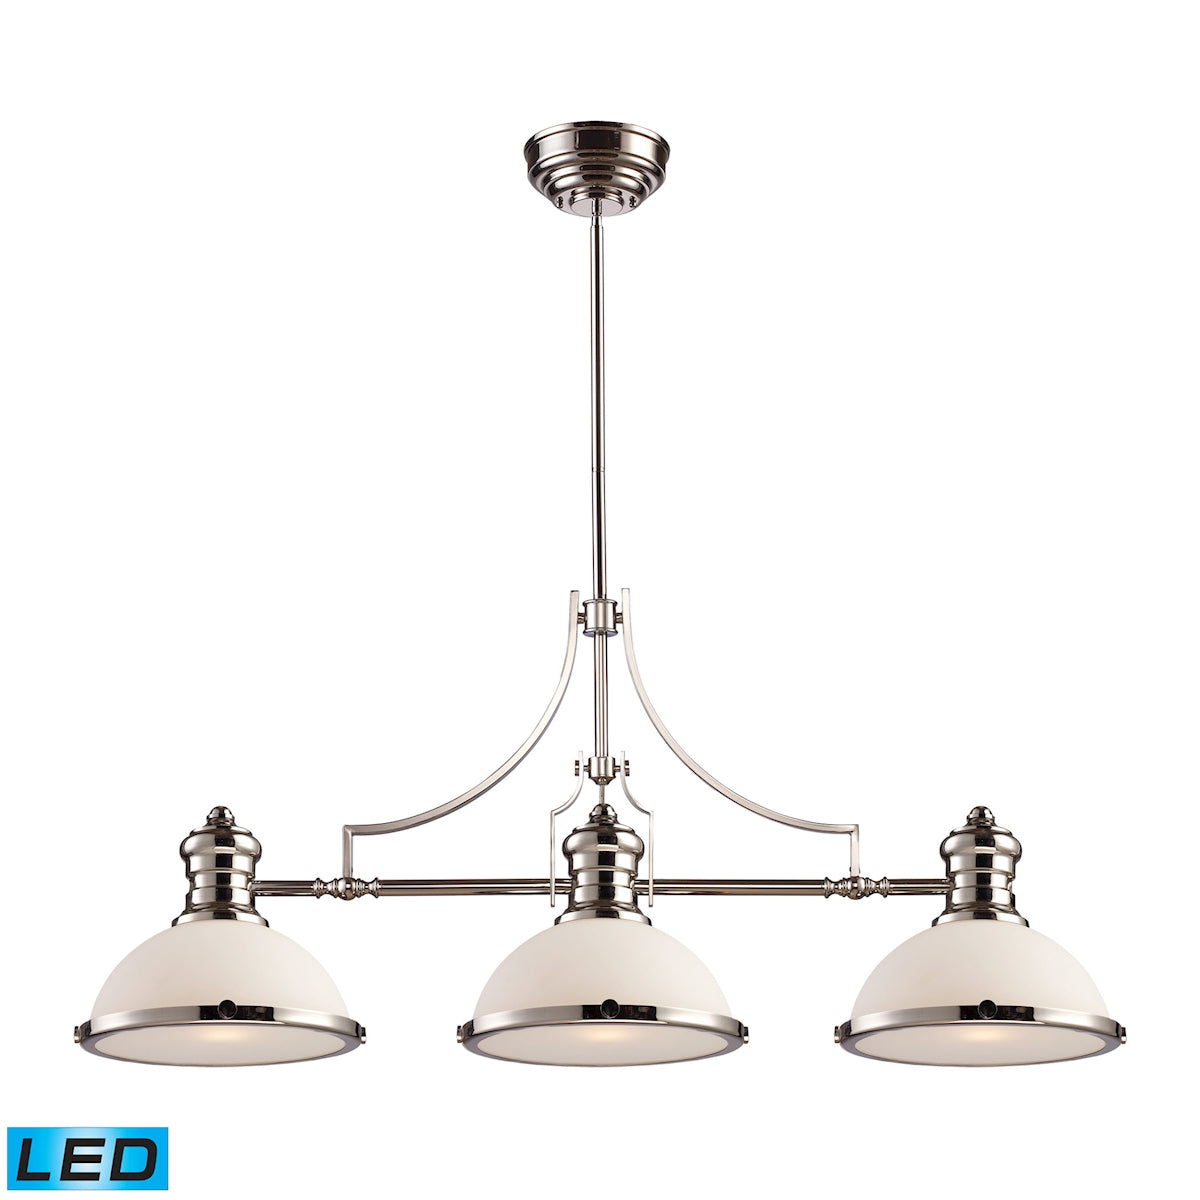 Chadwick 3-Light Island Light in Polished Nickel with Gloss White Shade - Includes LED Bulbs